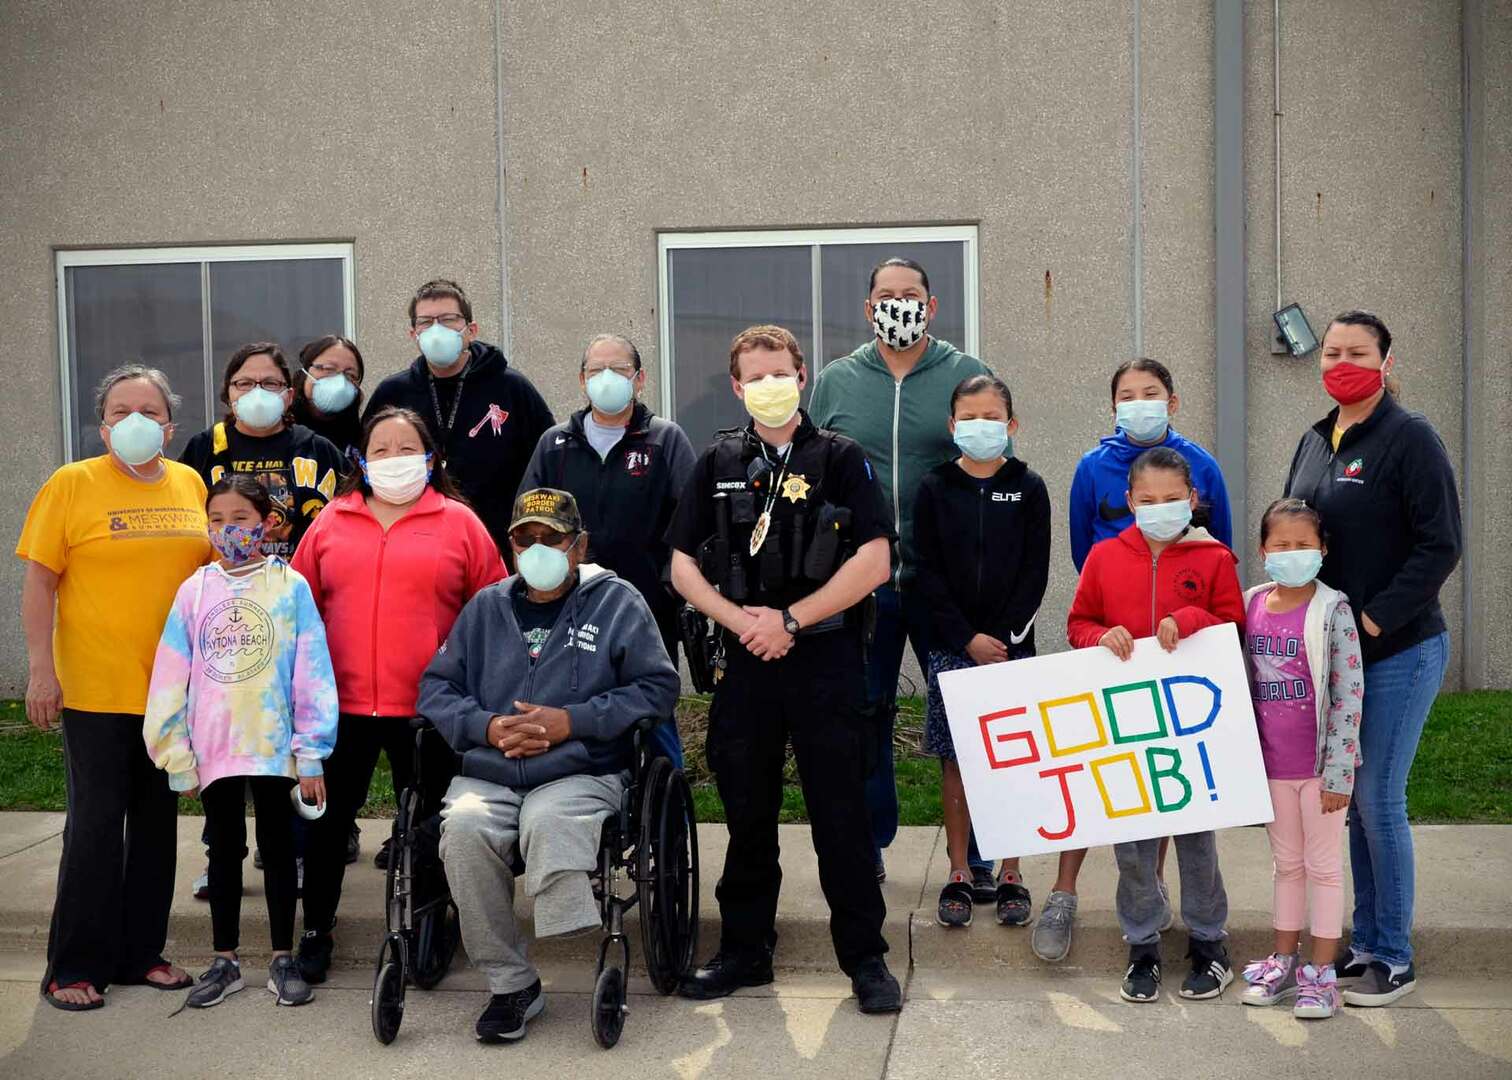 A group of people in masks with a Meskwaki Police Officer and a Good Job sign